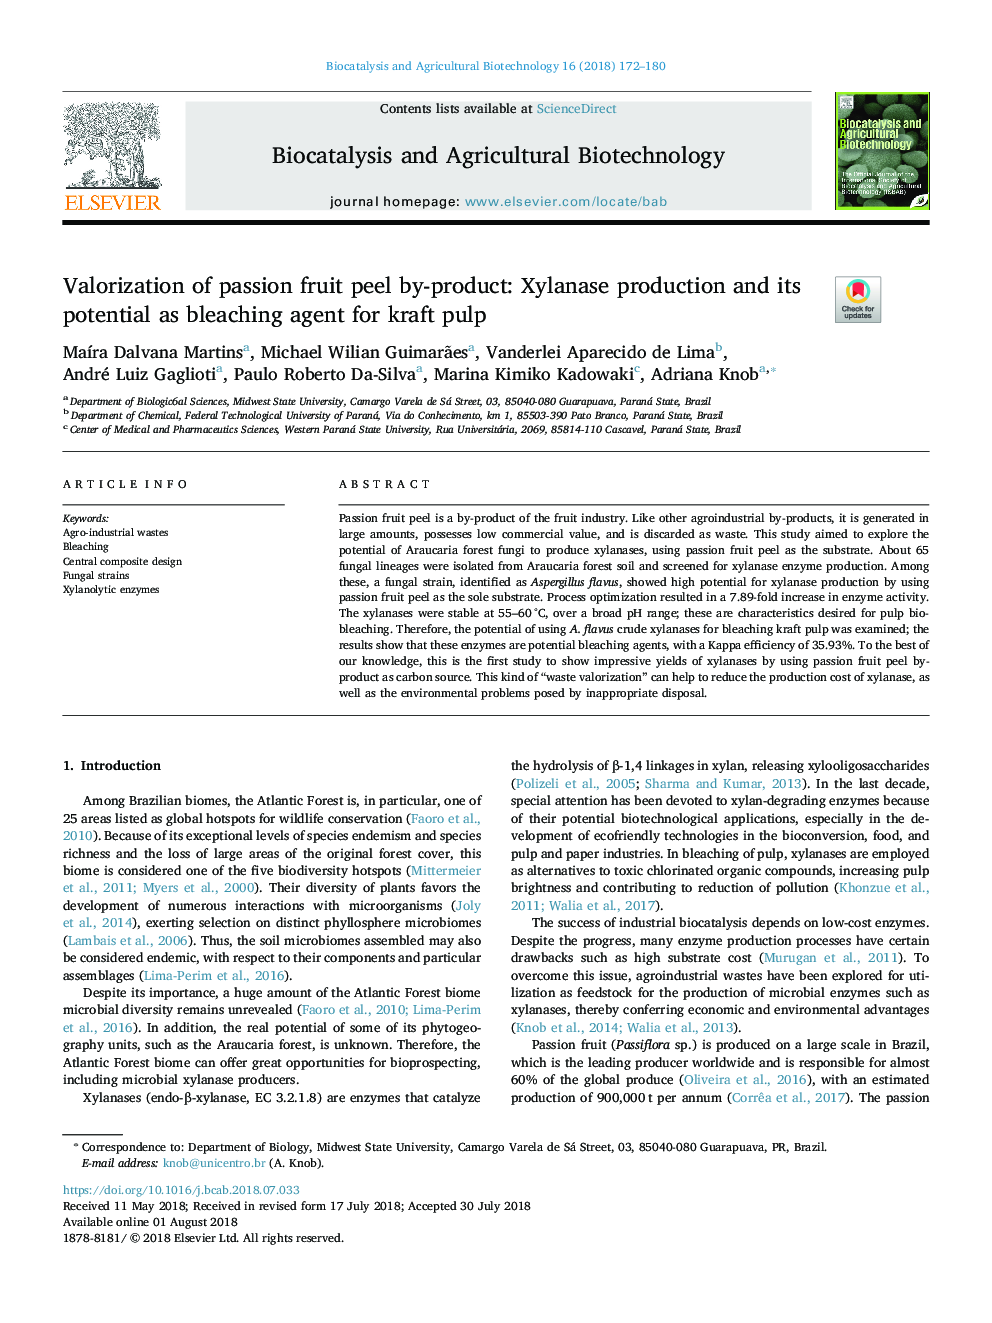 Valorization of passion fruit peel by-product: Xylanase production and its potential as bleaching agent for kraft pulp